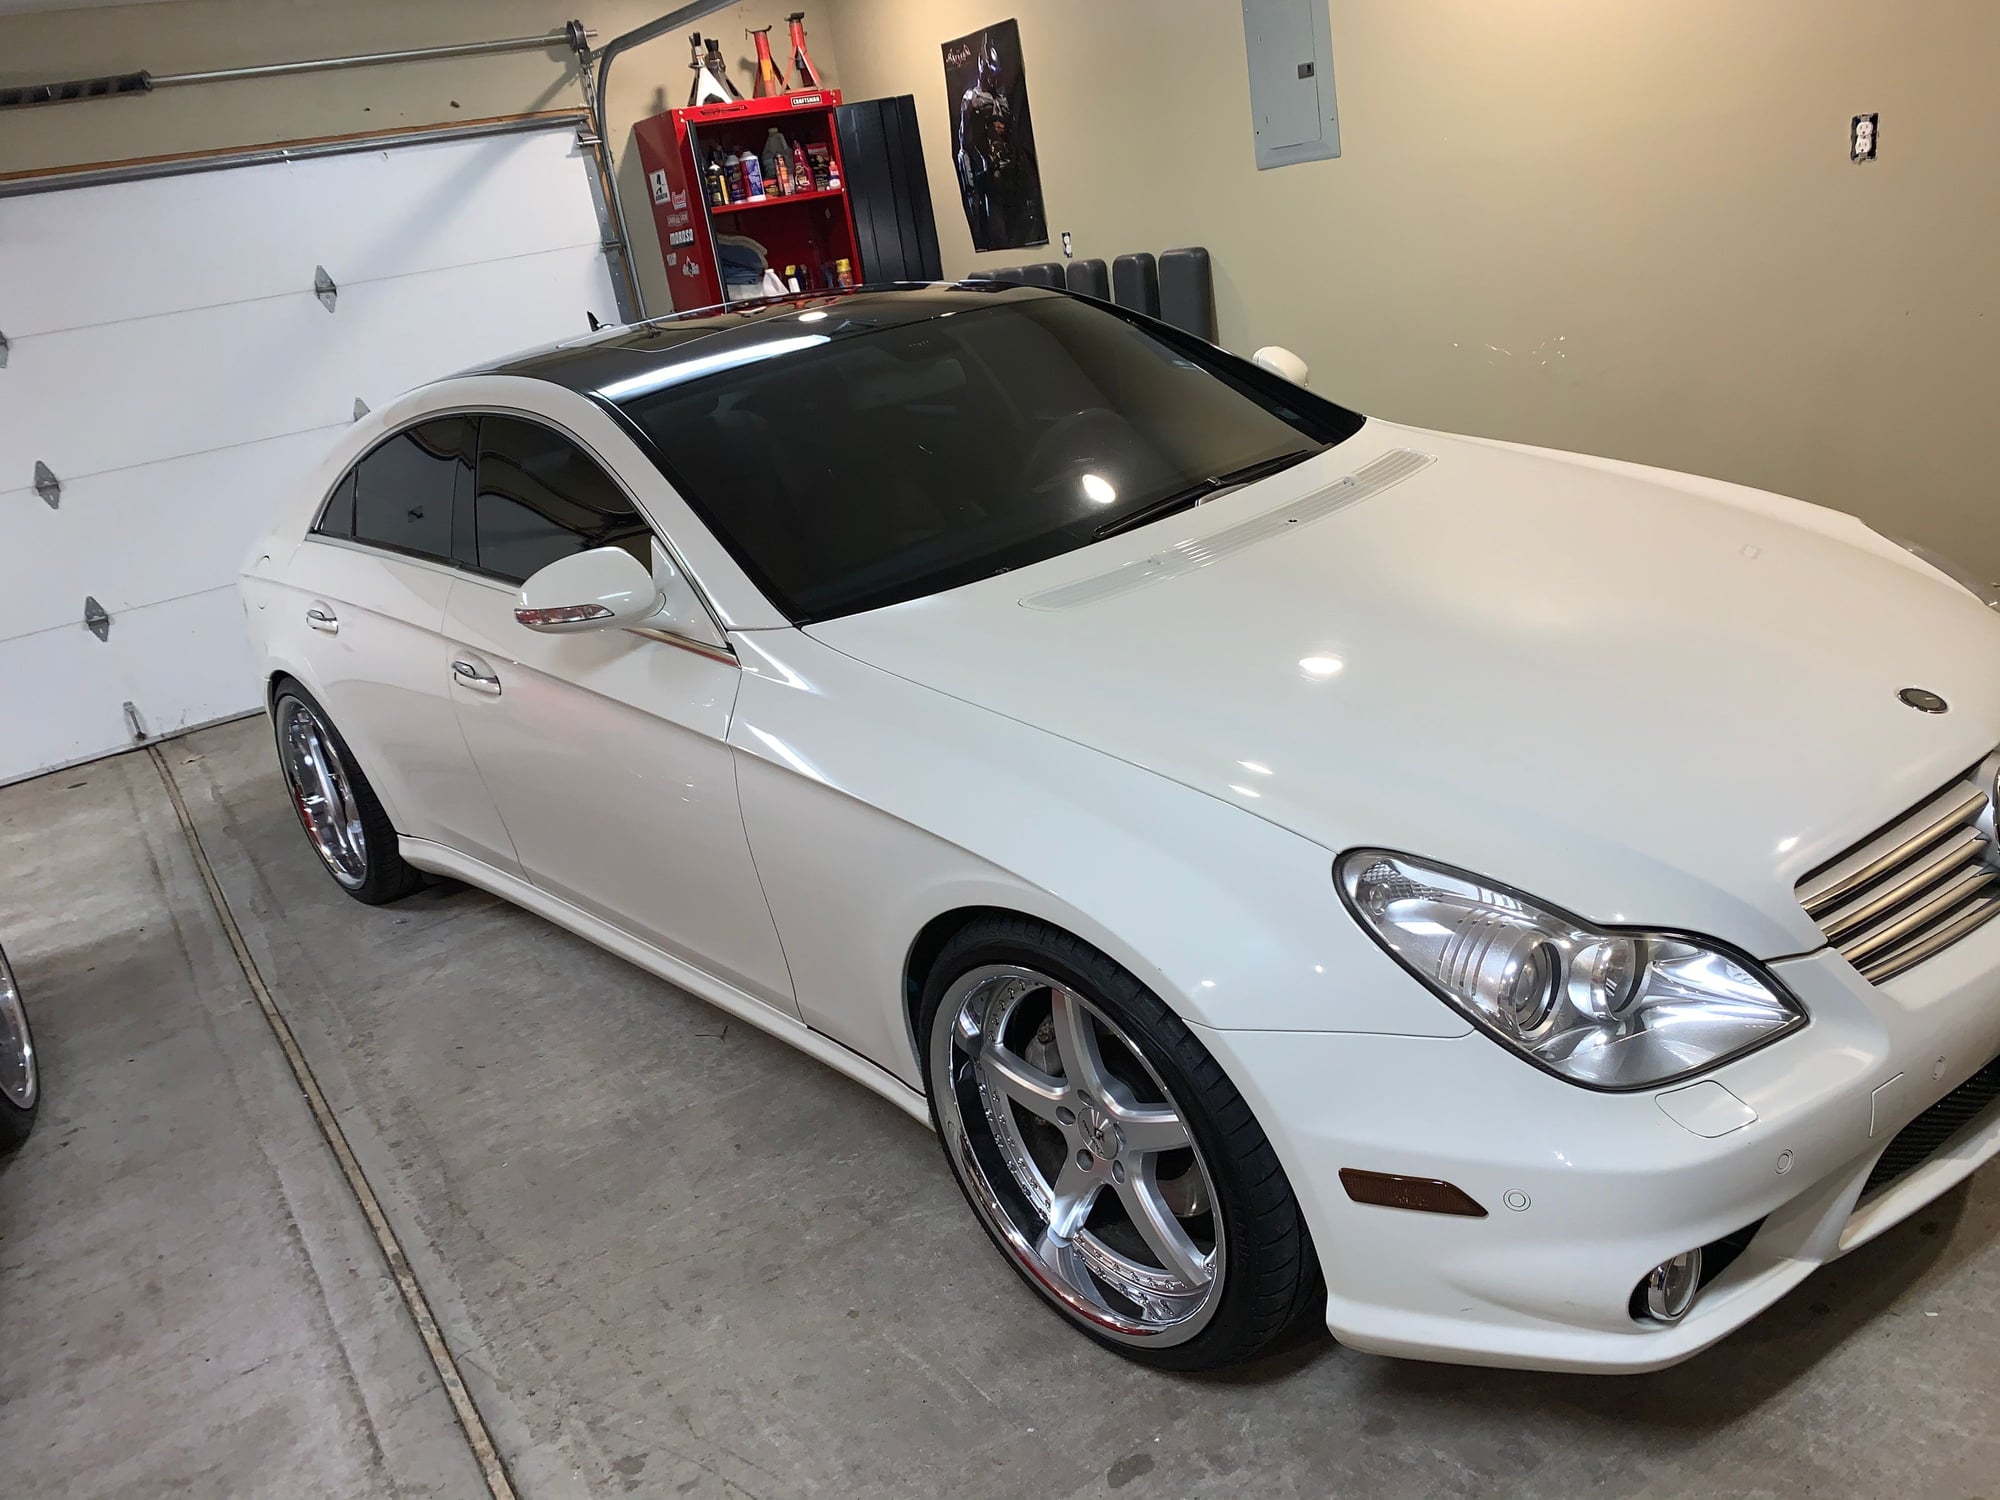 2007 Mercedes-Benz CLS550 - 07 CLS 550 AMG sport package - Used - VIN WDDJ72X37A097528 - 106,386 Miles - 8 cyl - 2WD - Automatic - Sedan - White - St Louis, MO 63113, United States